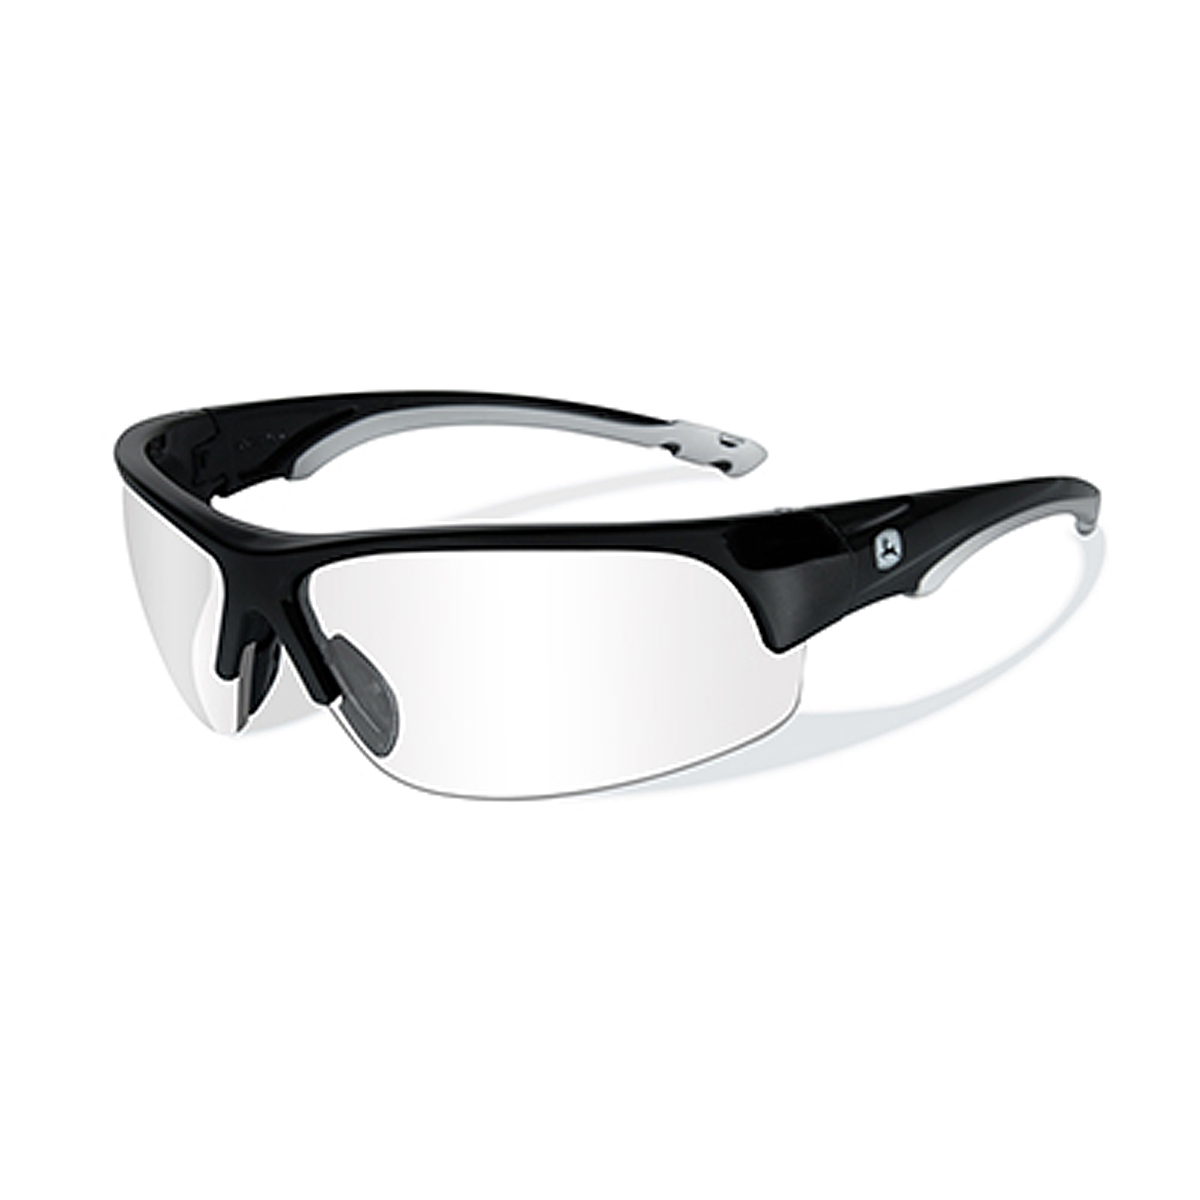 Torque-X Safety Glasses